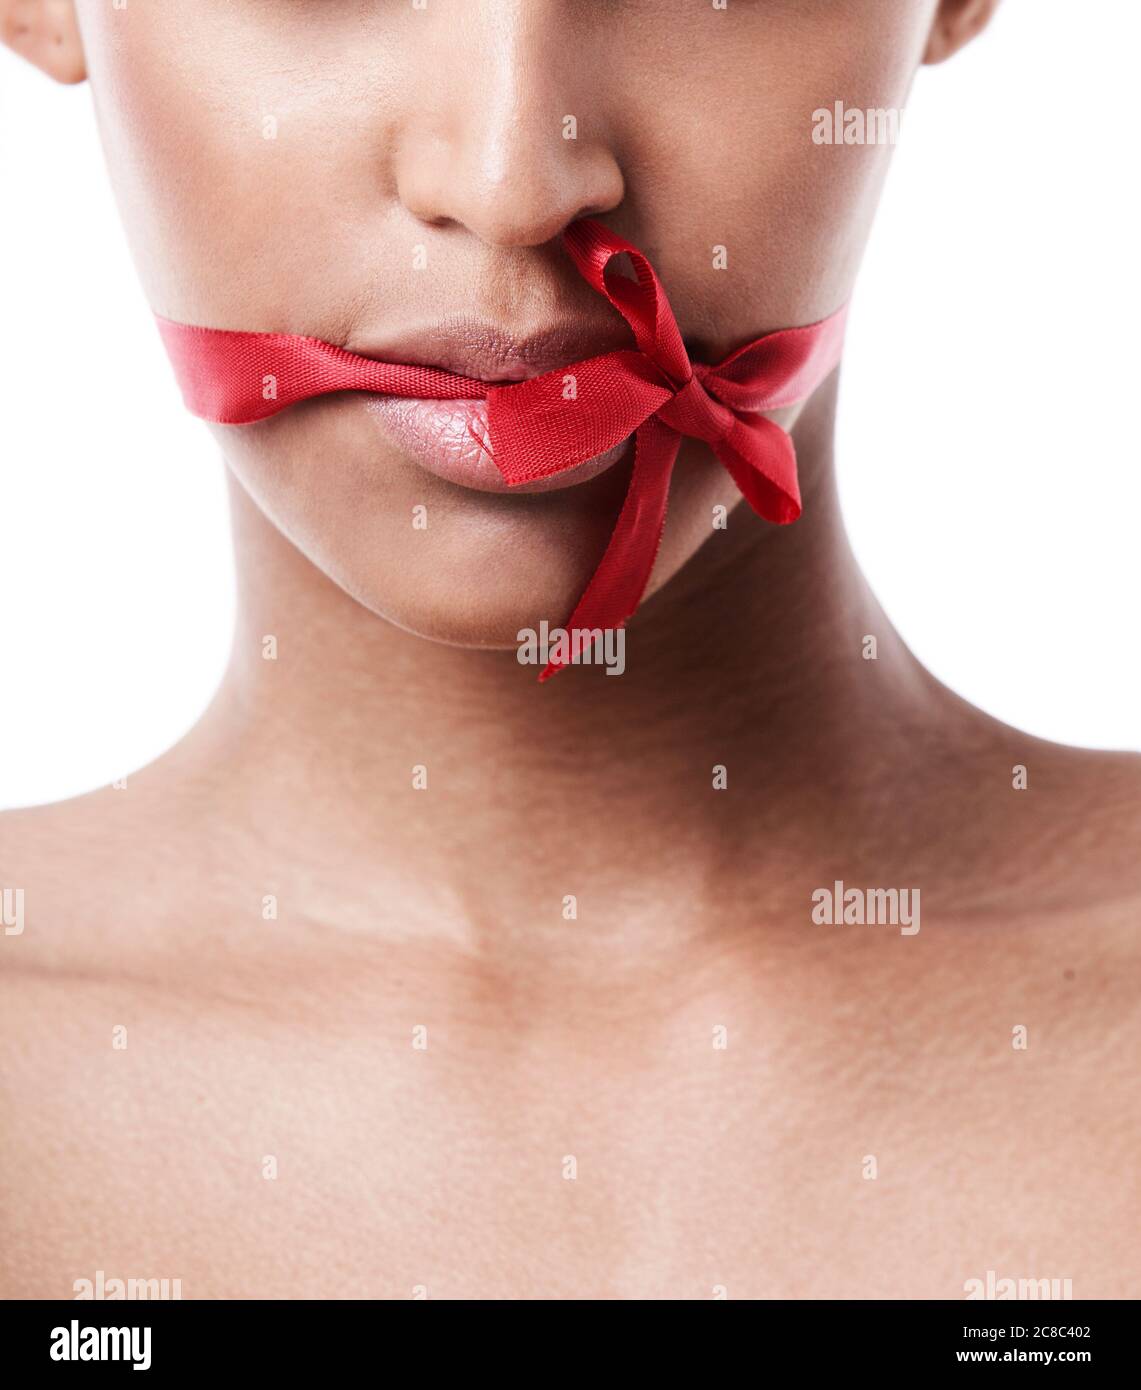 Red bow tied over womans mouth Stock Photo